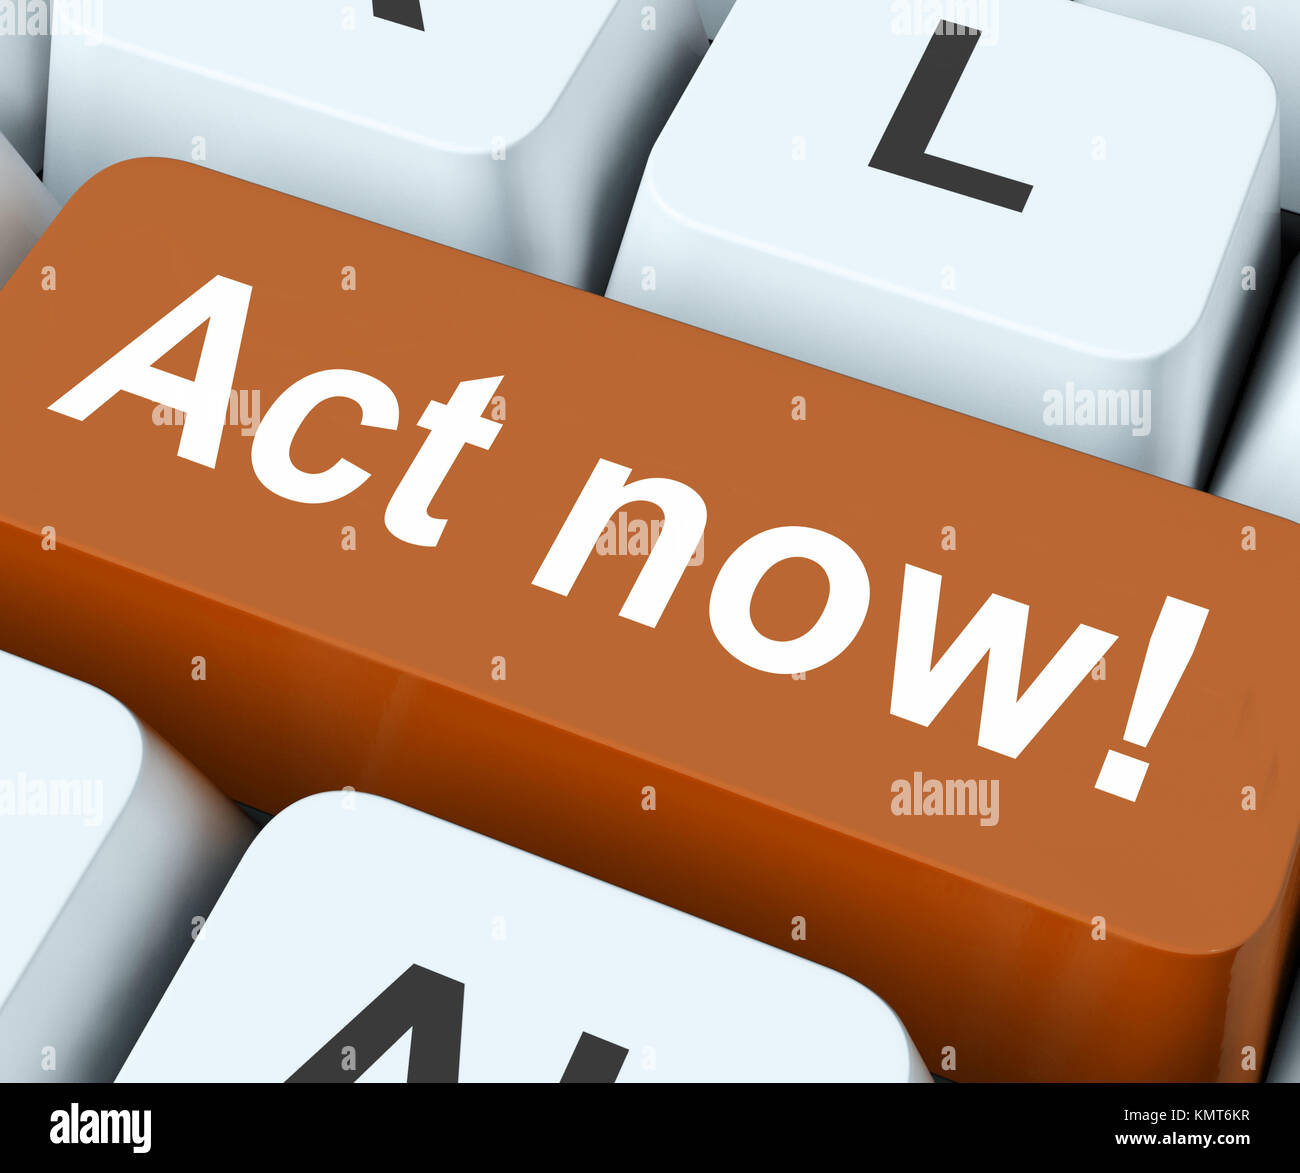 Act Now Key On Keyboard Meaning Do it Or Take Action Stock Photo